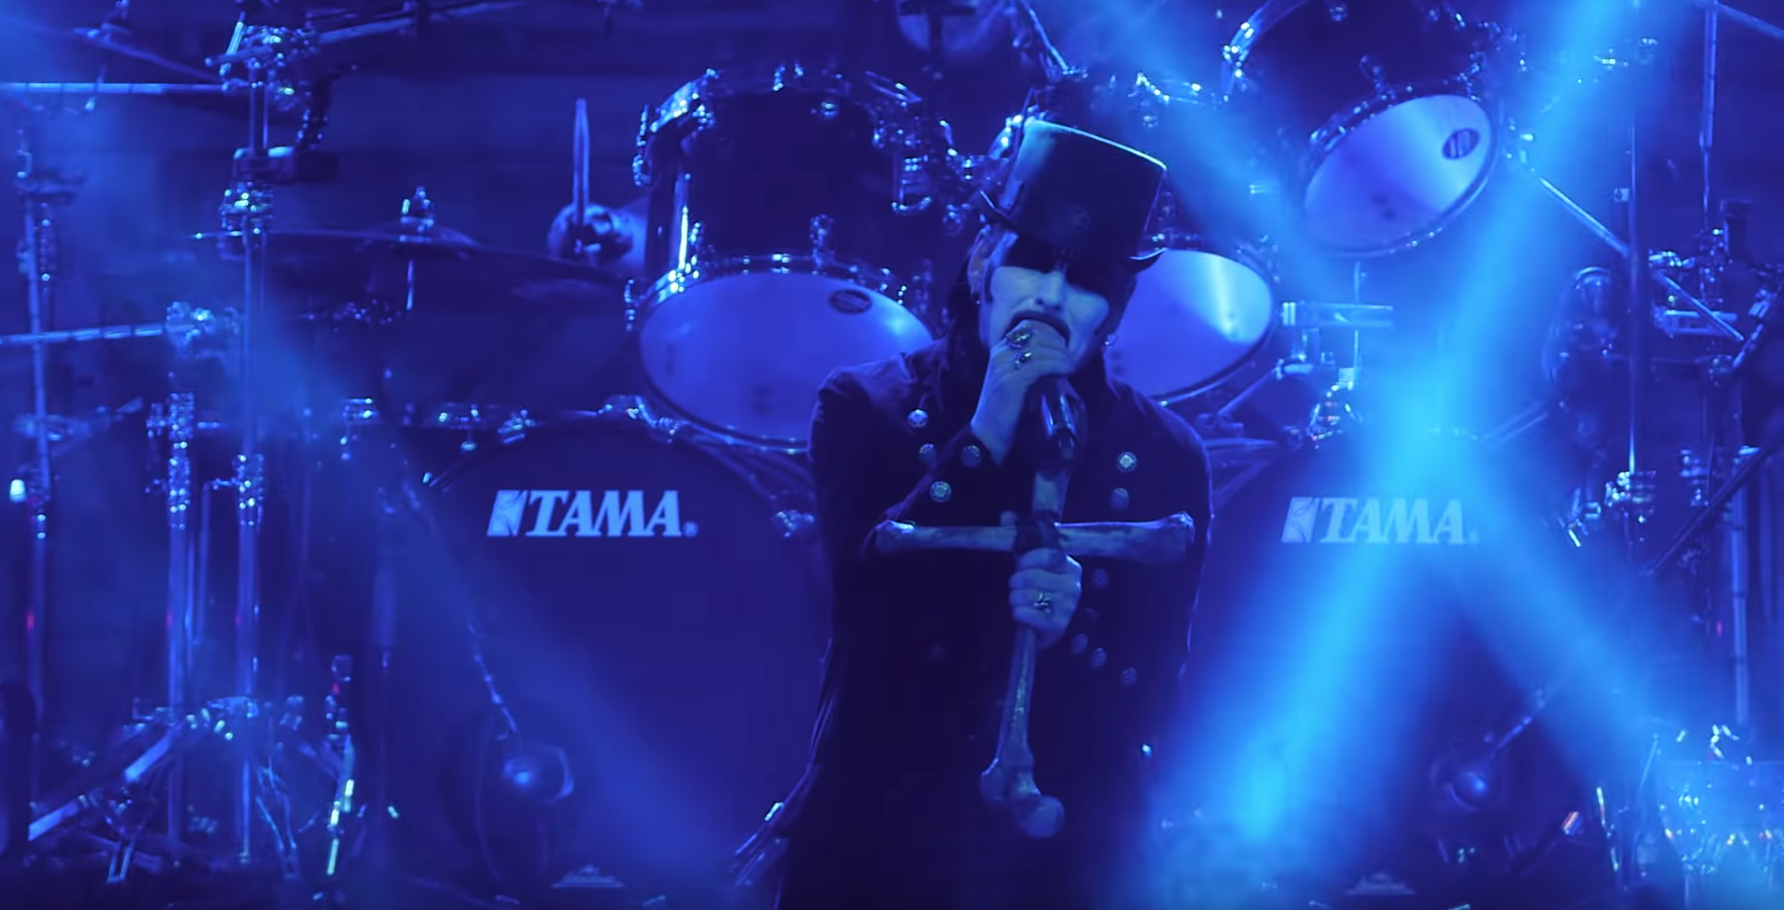 King Diamond to release ‘Songs For the Dead Live’ DVD/BluRay in January